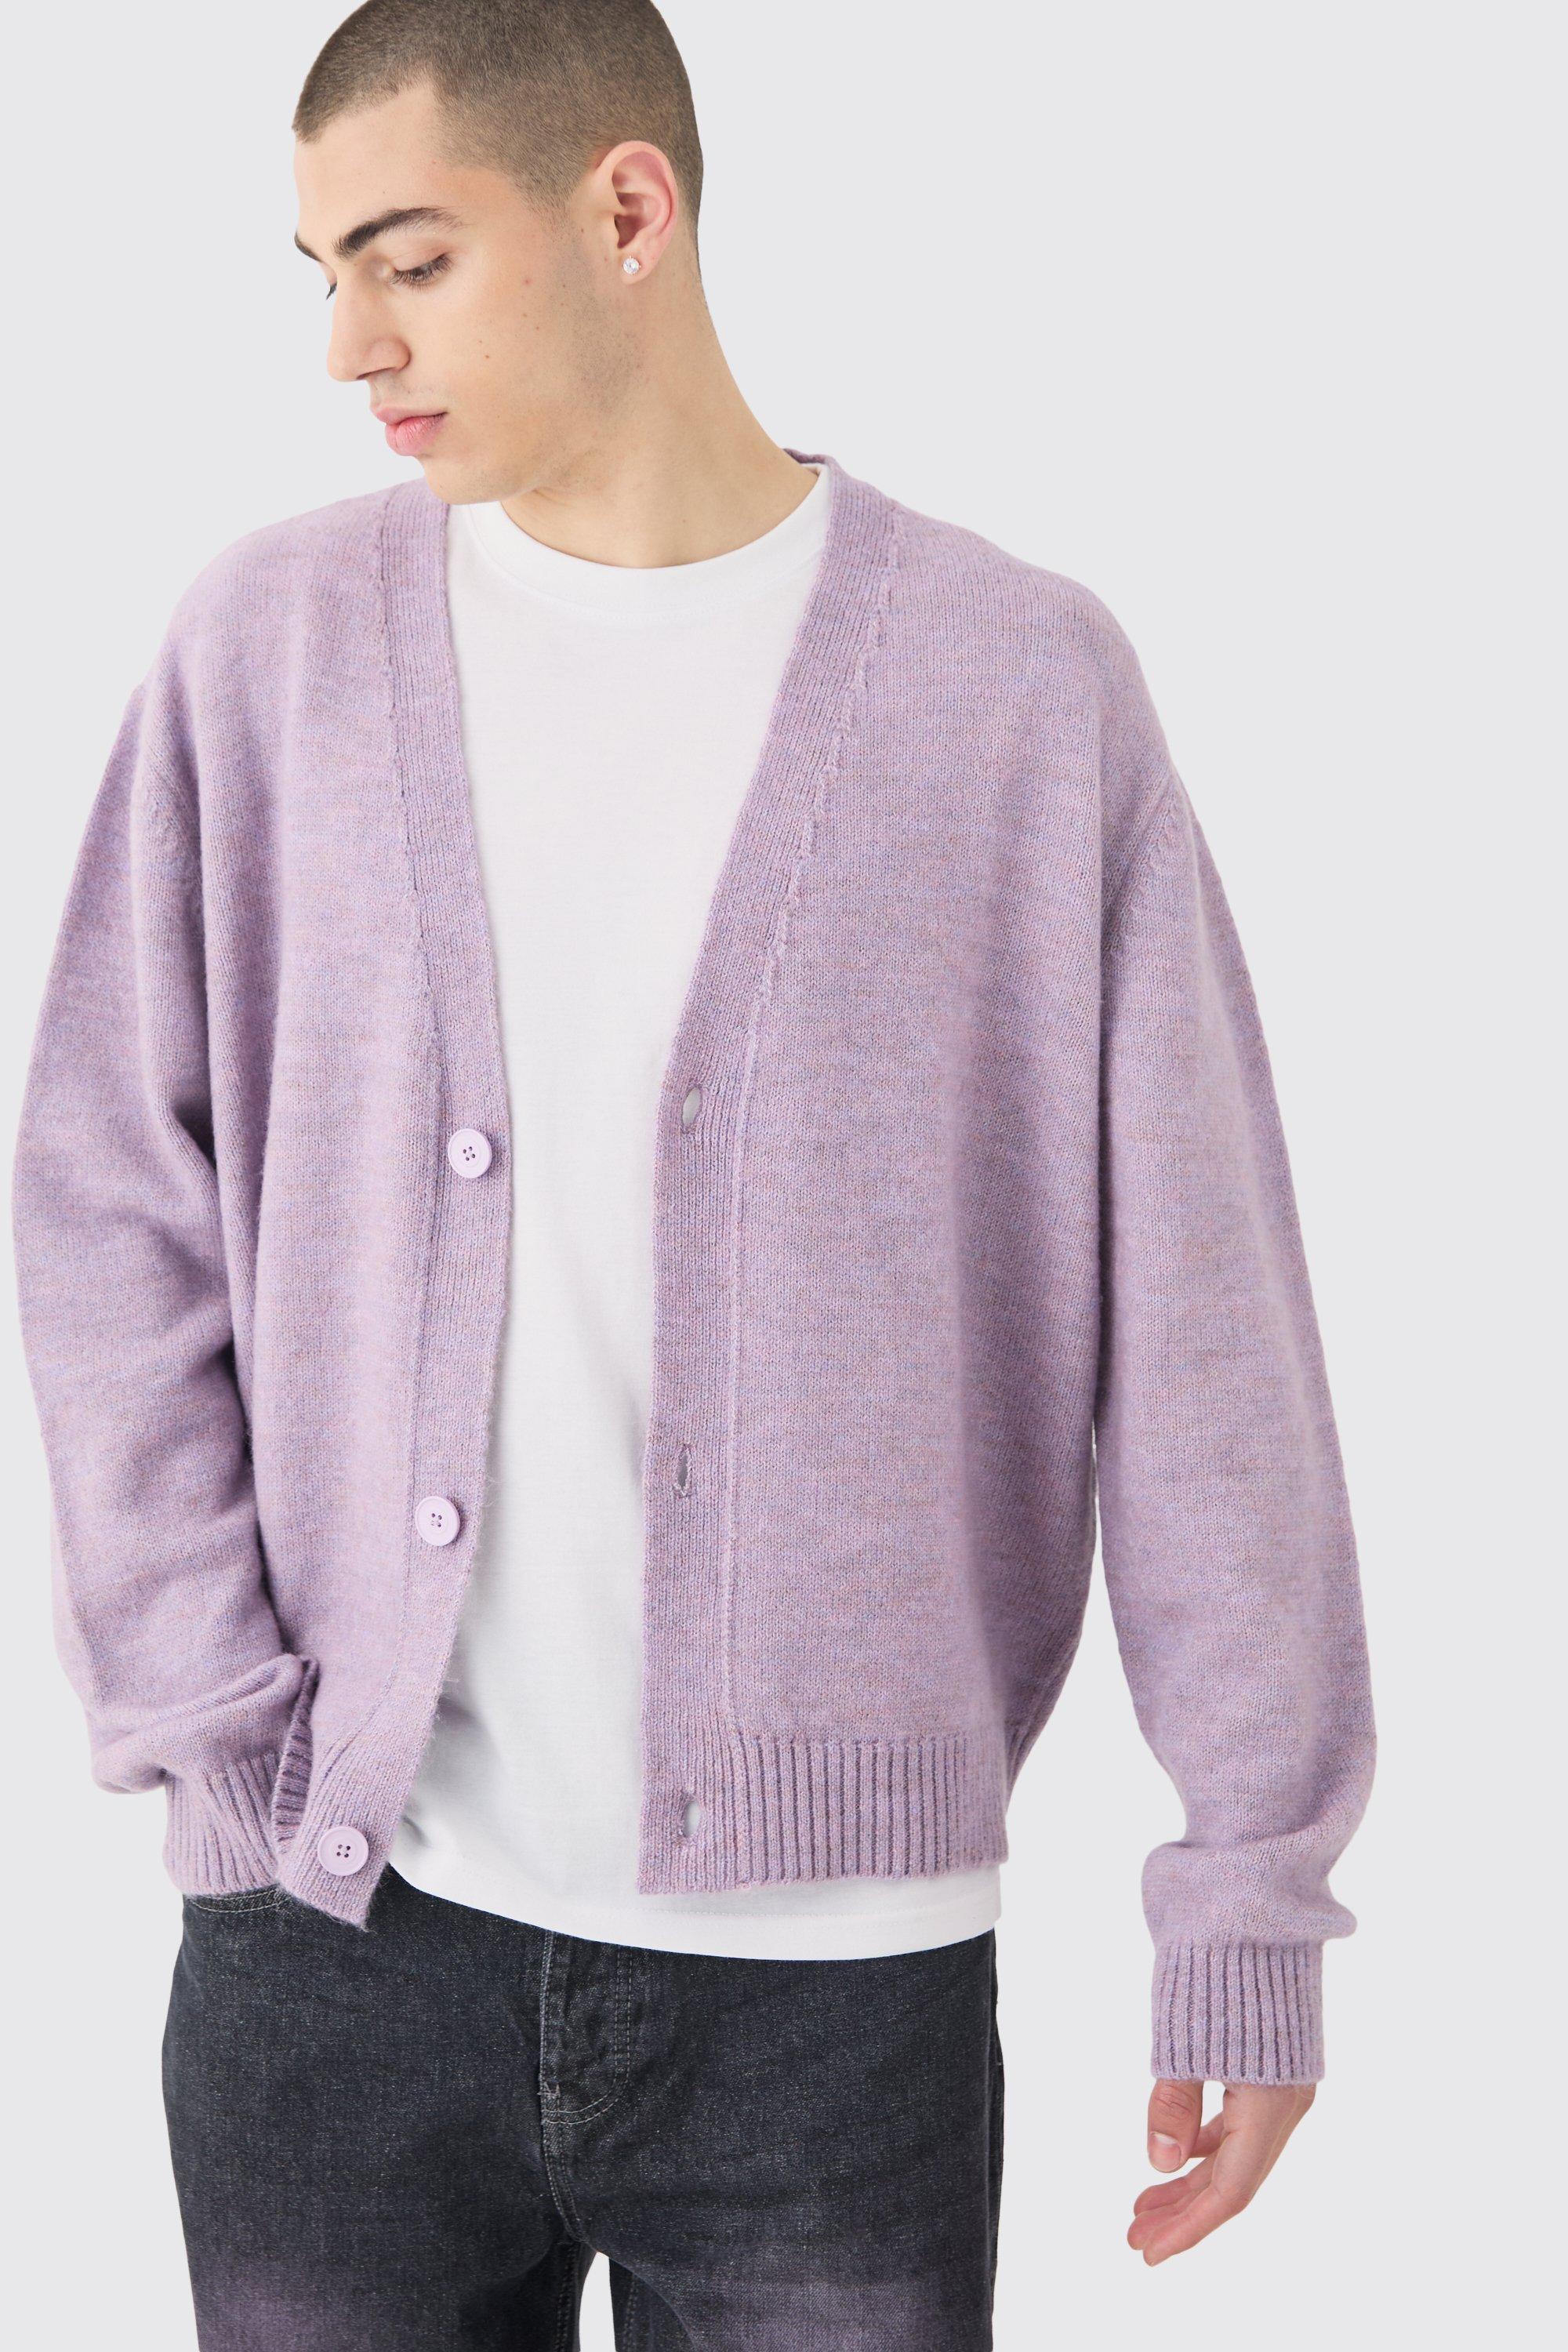 Boohoo Boxy Brushed Knit Cardigan In Lilac, Lilac